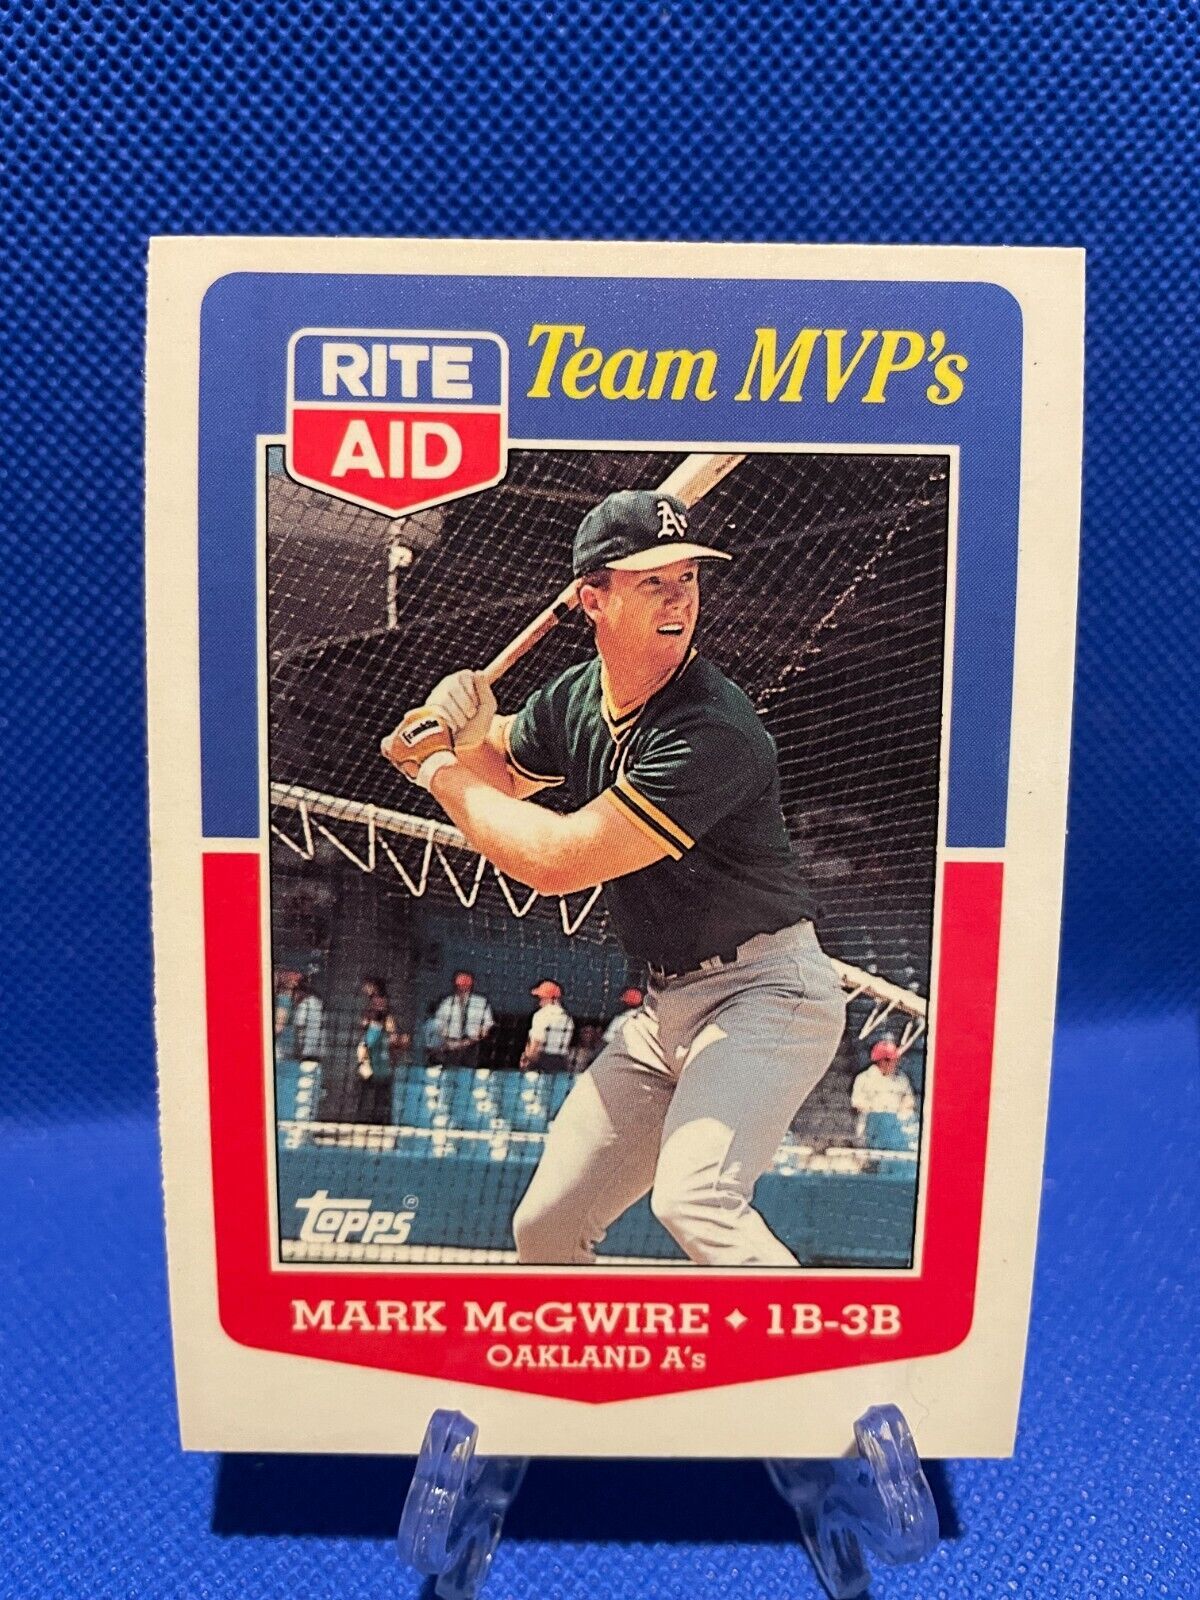 Primary image for Mark McGwire 1988 Topps Rite Aid Baseball Card #23 (NM)